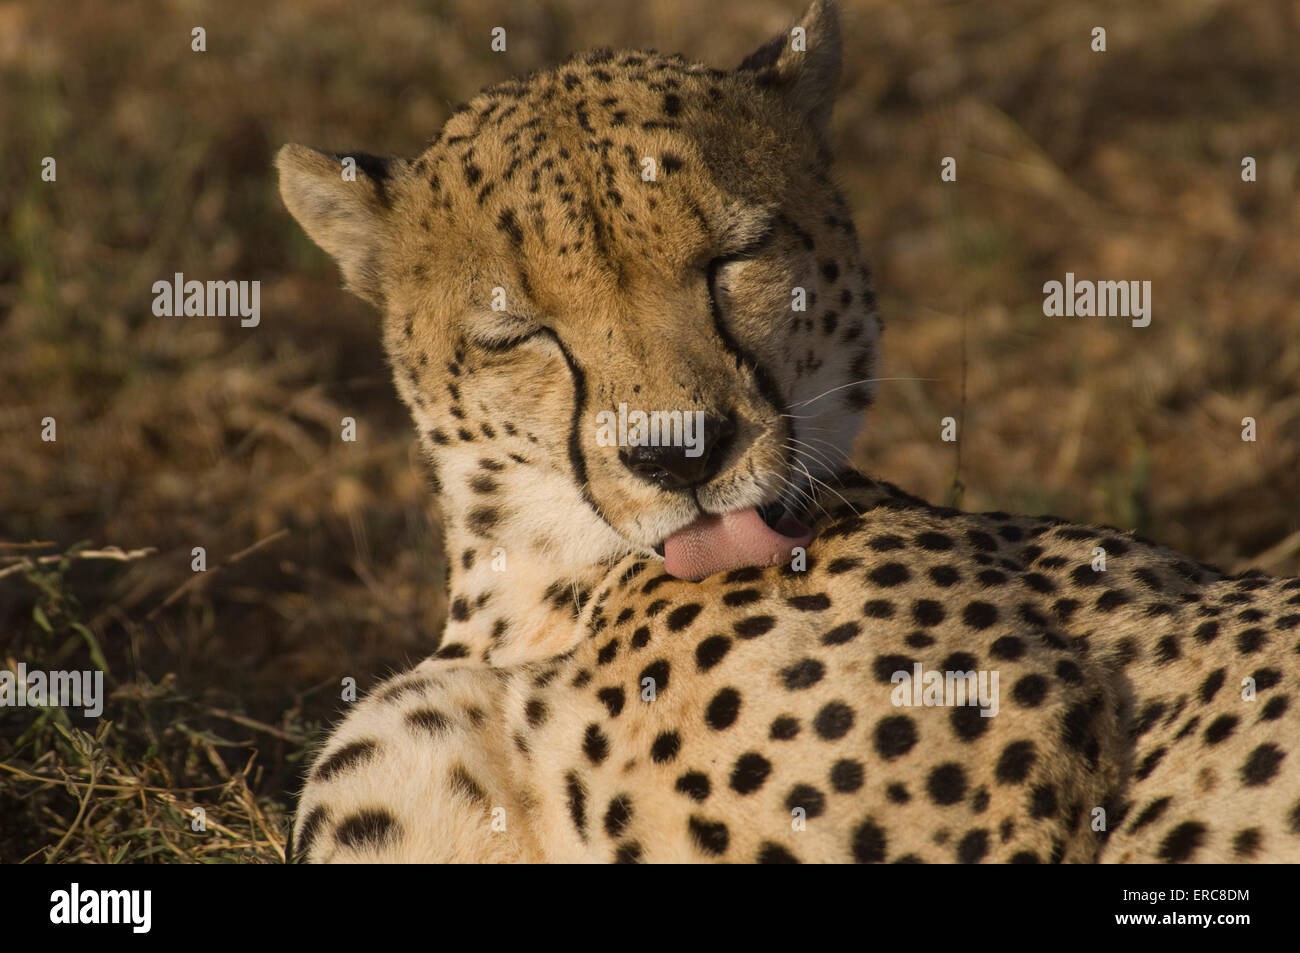 CHEETAH GROOMING LICKING HIS SPOTTED FUR Stock Photo